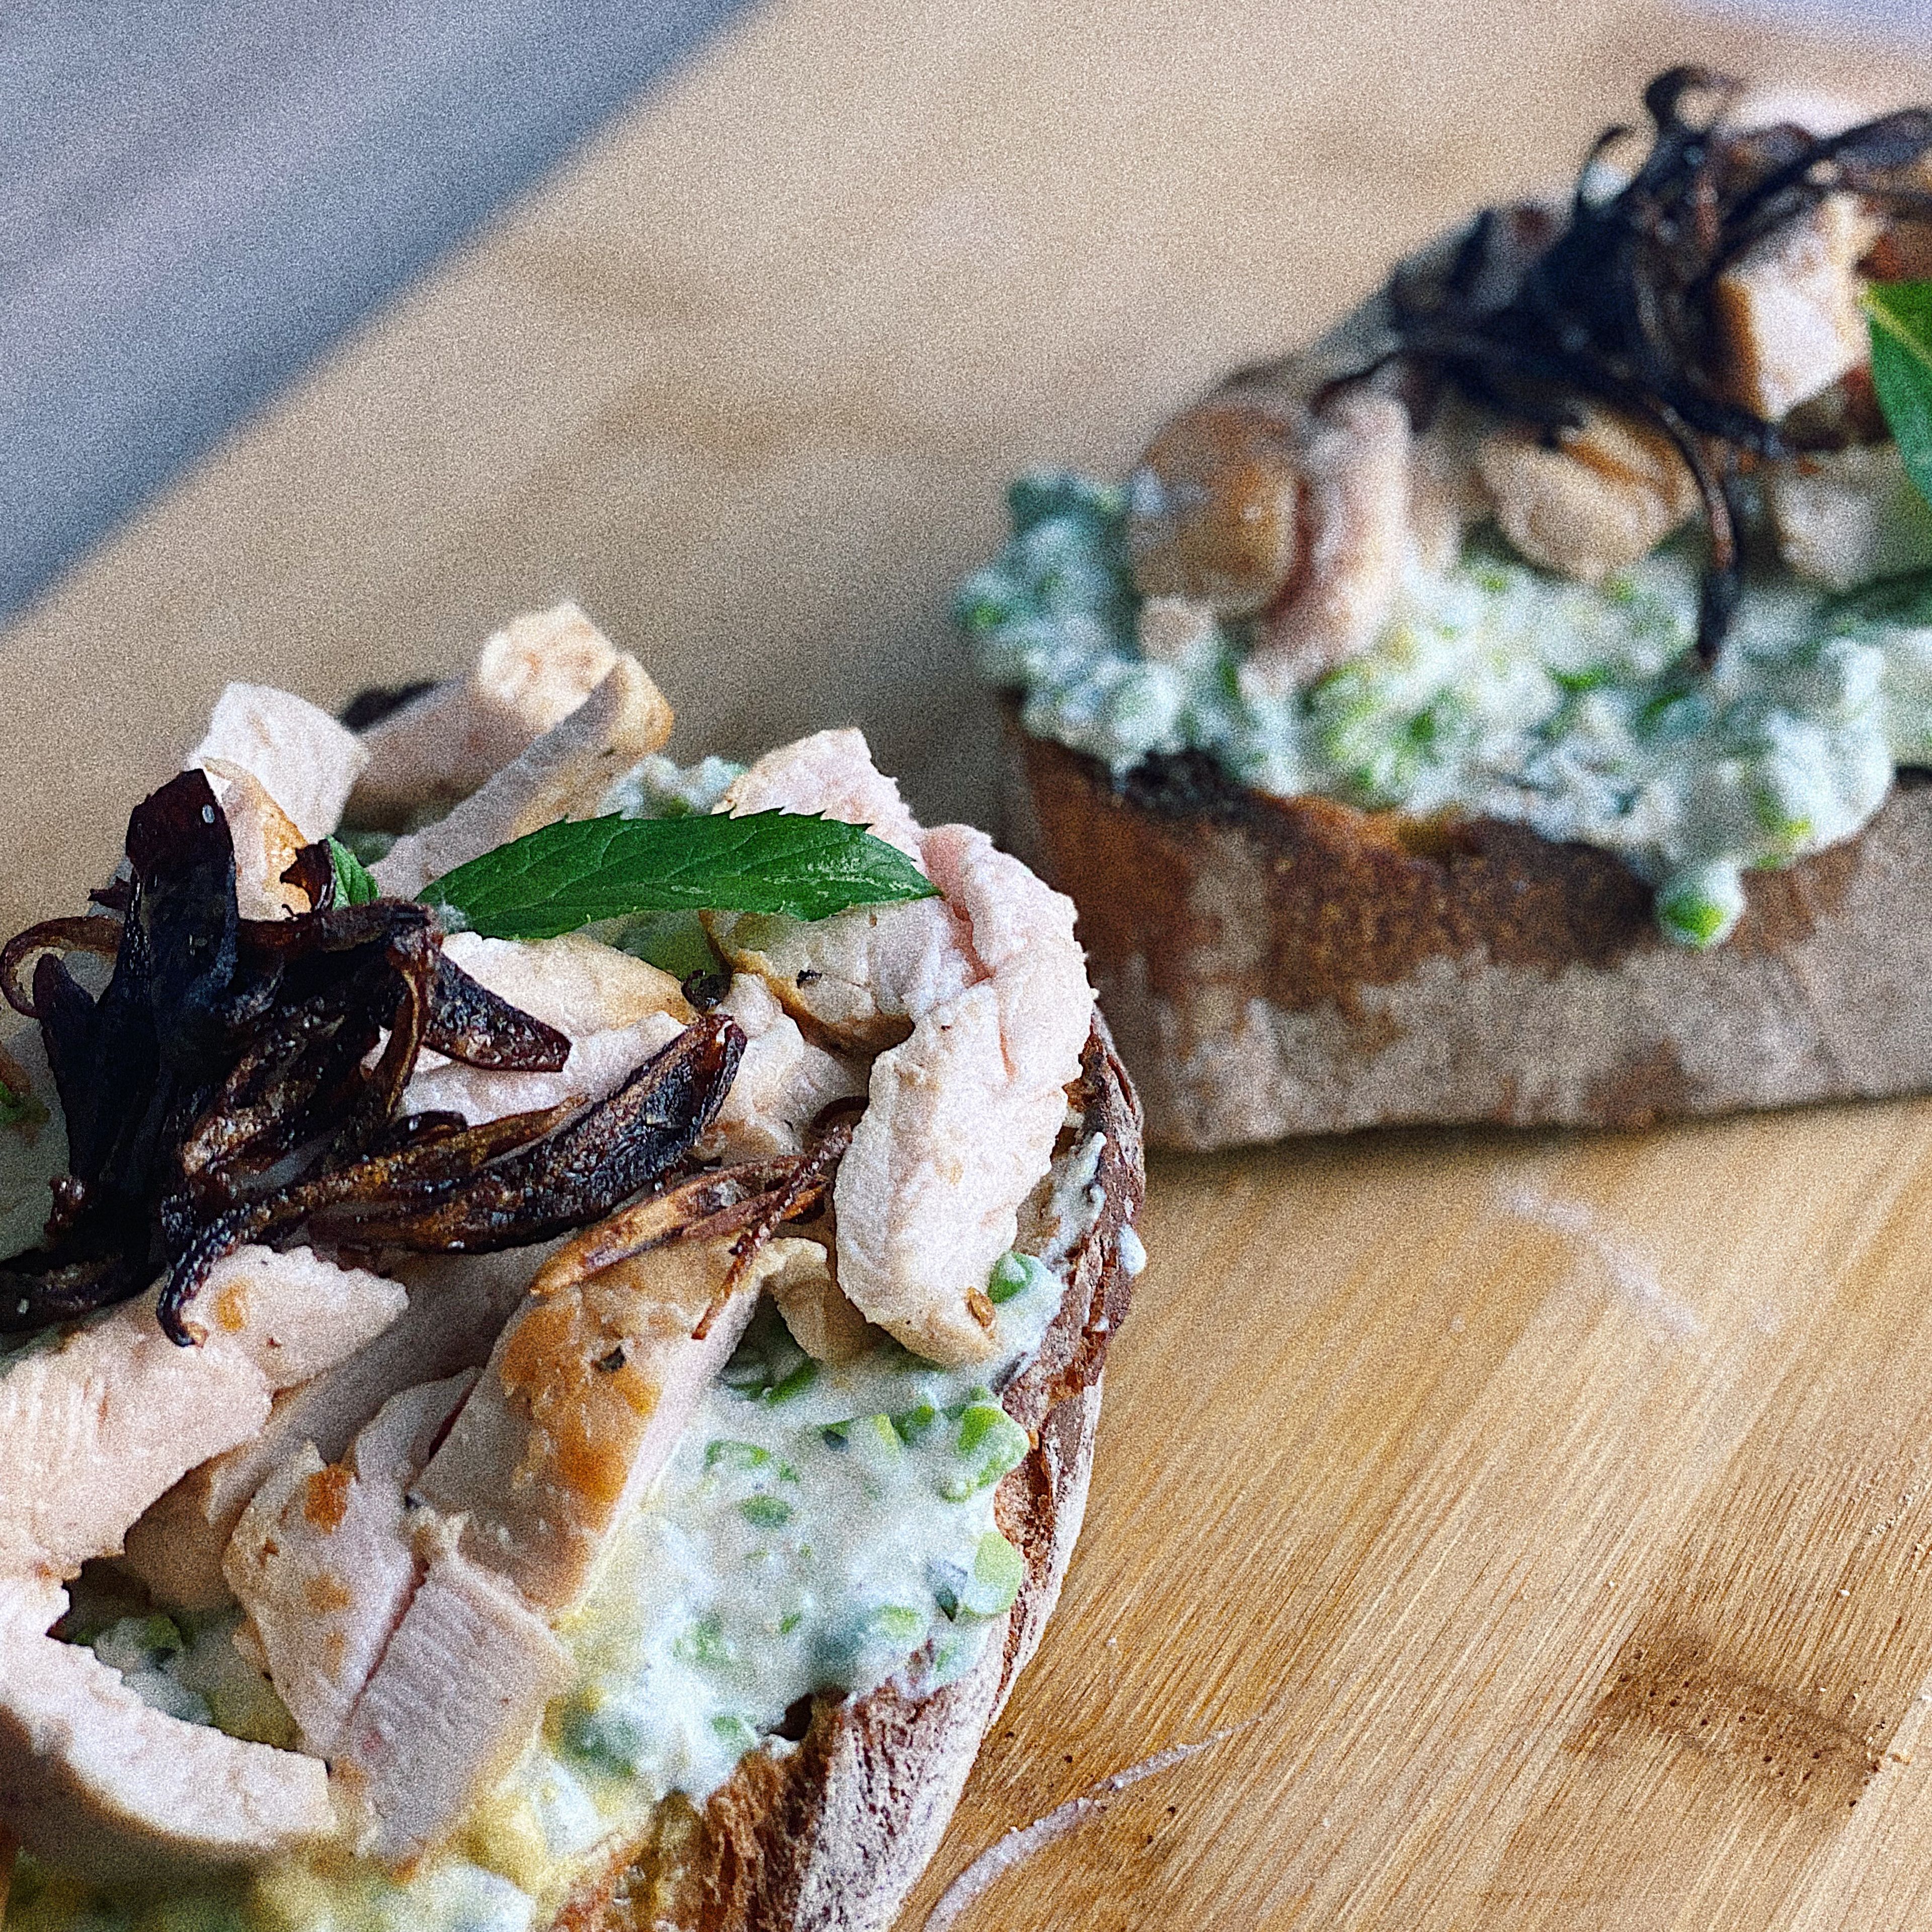 TO SERVE. Divide the mashed peas between the 2 grilled toasts, then fan half the chicken on top of each toast. Season with more salt and pepper. Drizzle with the dressing, top with crispy shallots, and garnish with mint and lemon zest.